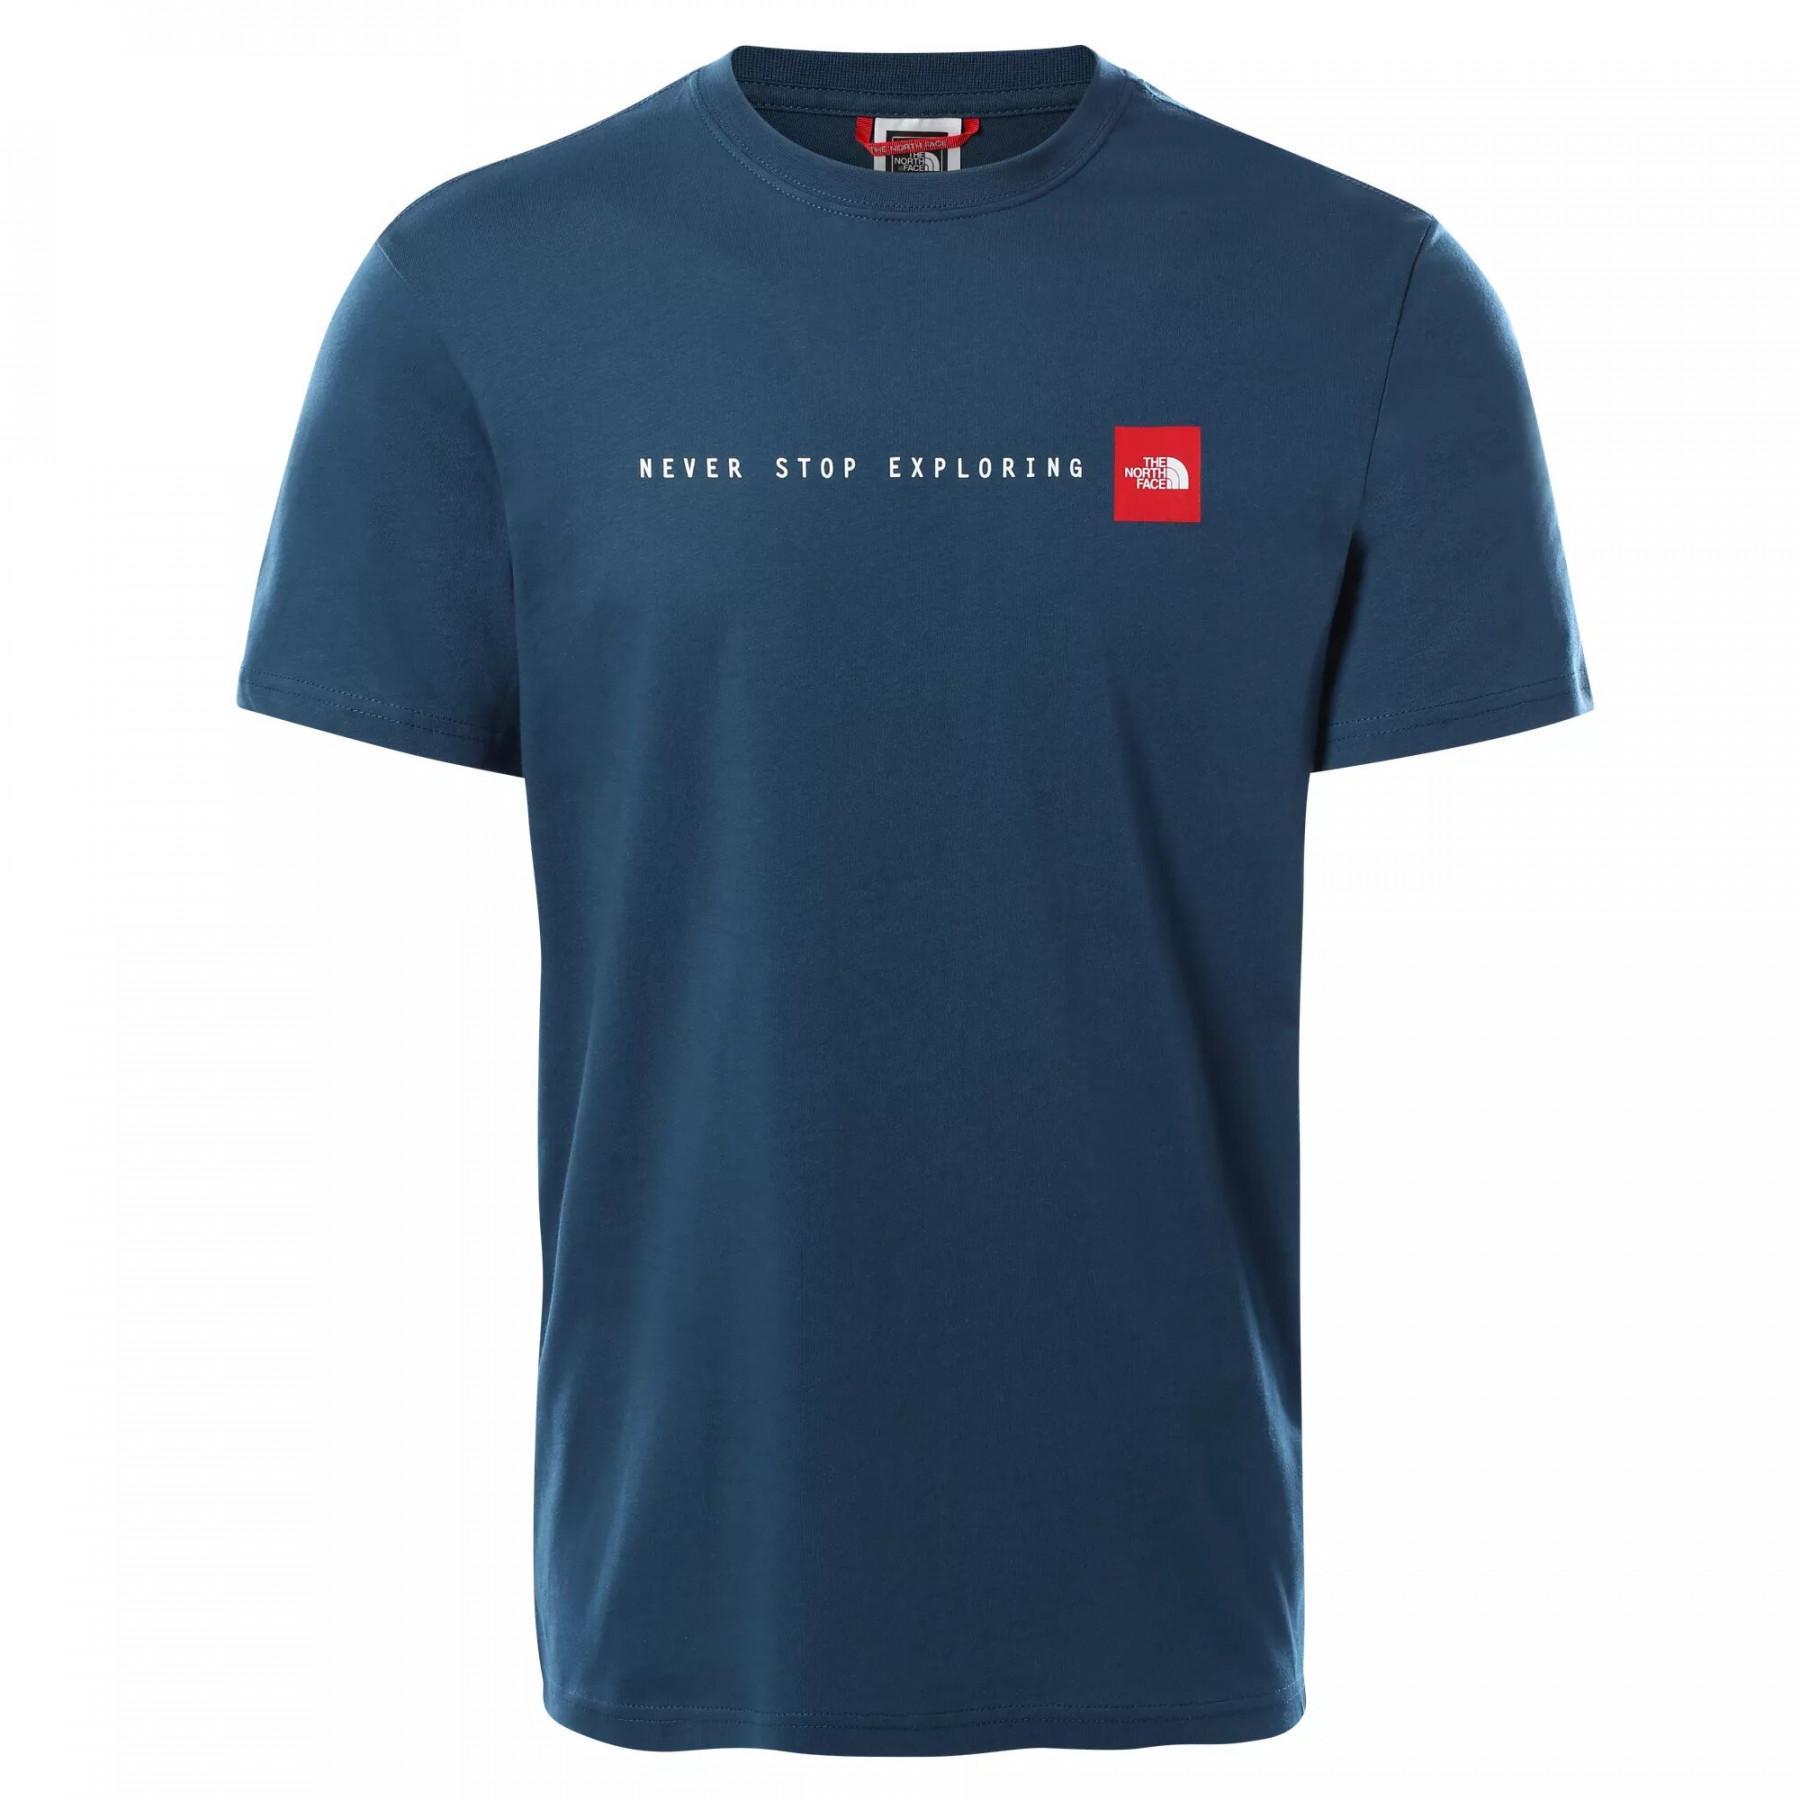 Klassisches T-Shirt The North Face "Never Stop Exploring"